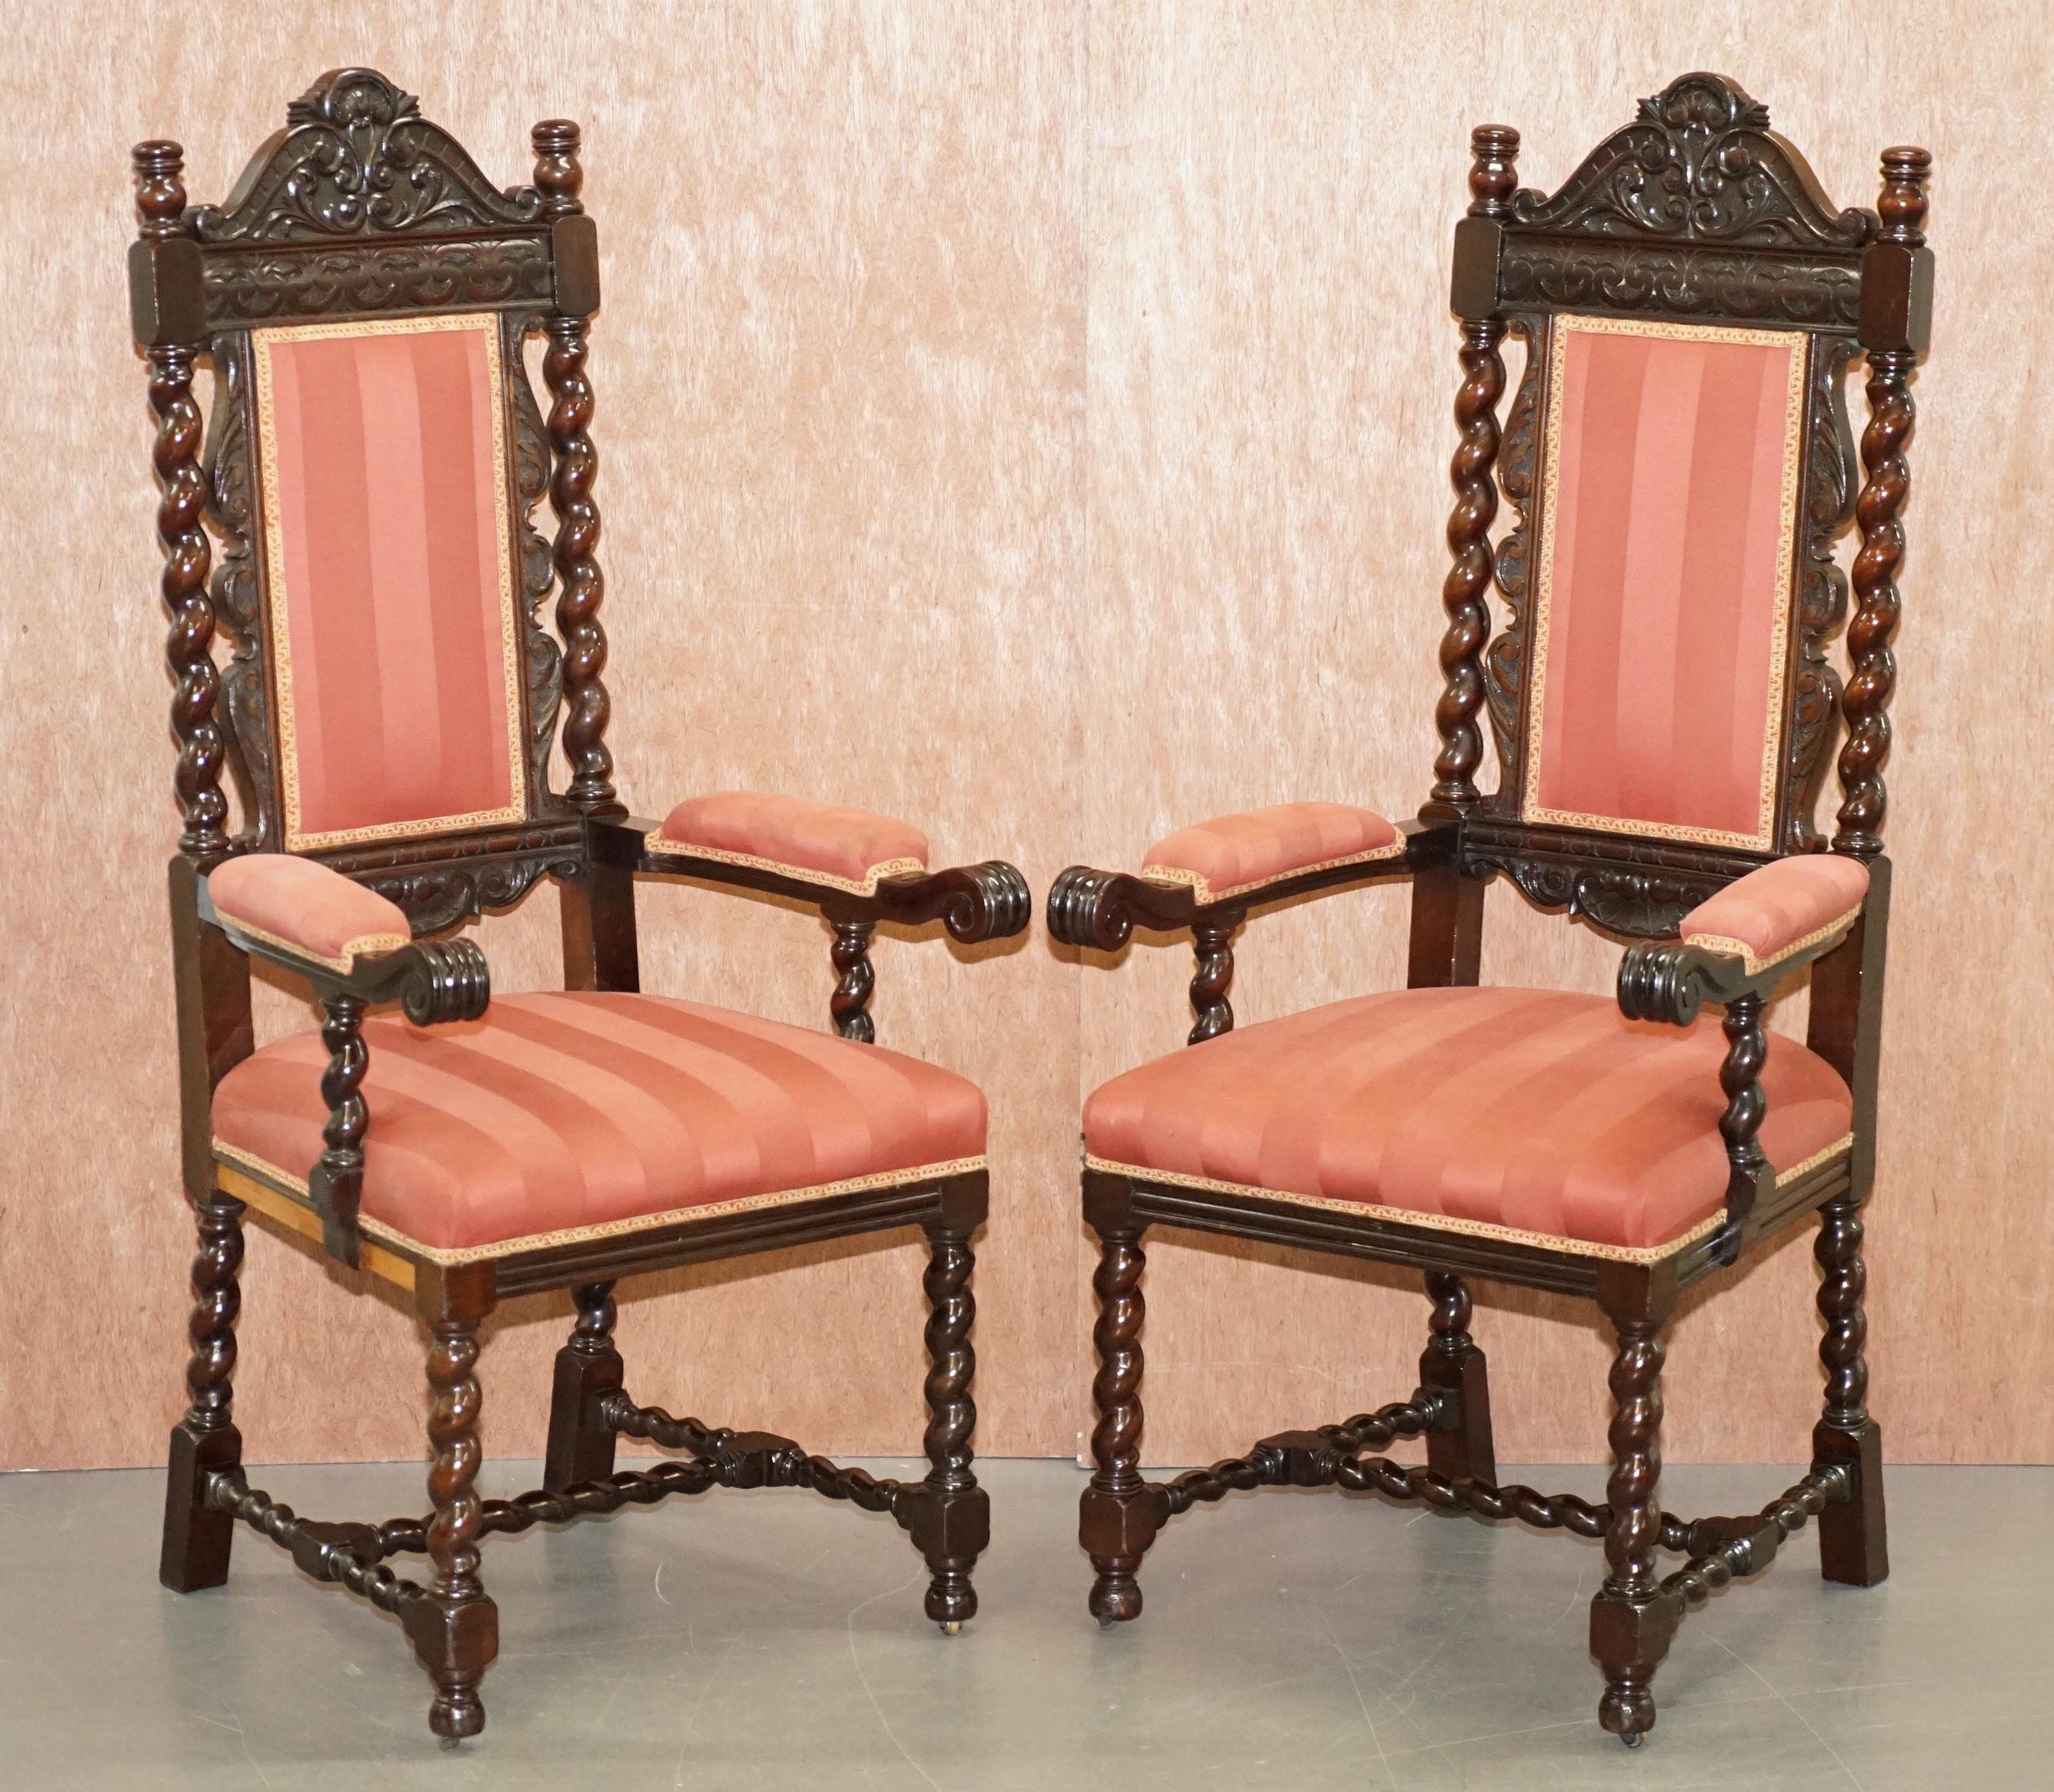 We are delighted to offer for sale this lovely suite of 10 original Victorian hand carved Gothic / Jacobean revival dining chairs

A very ornately carved suite of very grand dining chairs. The frames are barley twist all over, they each have the